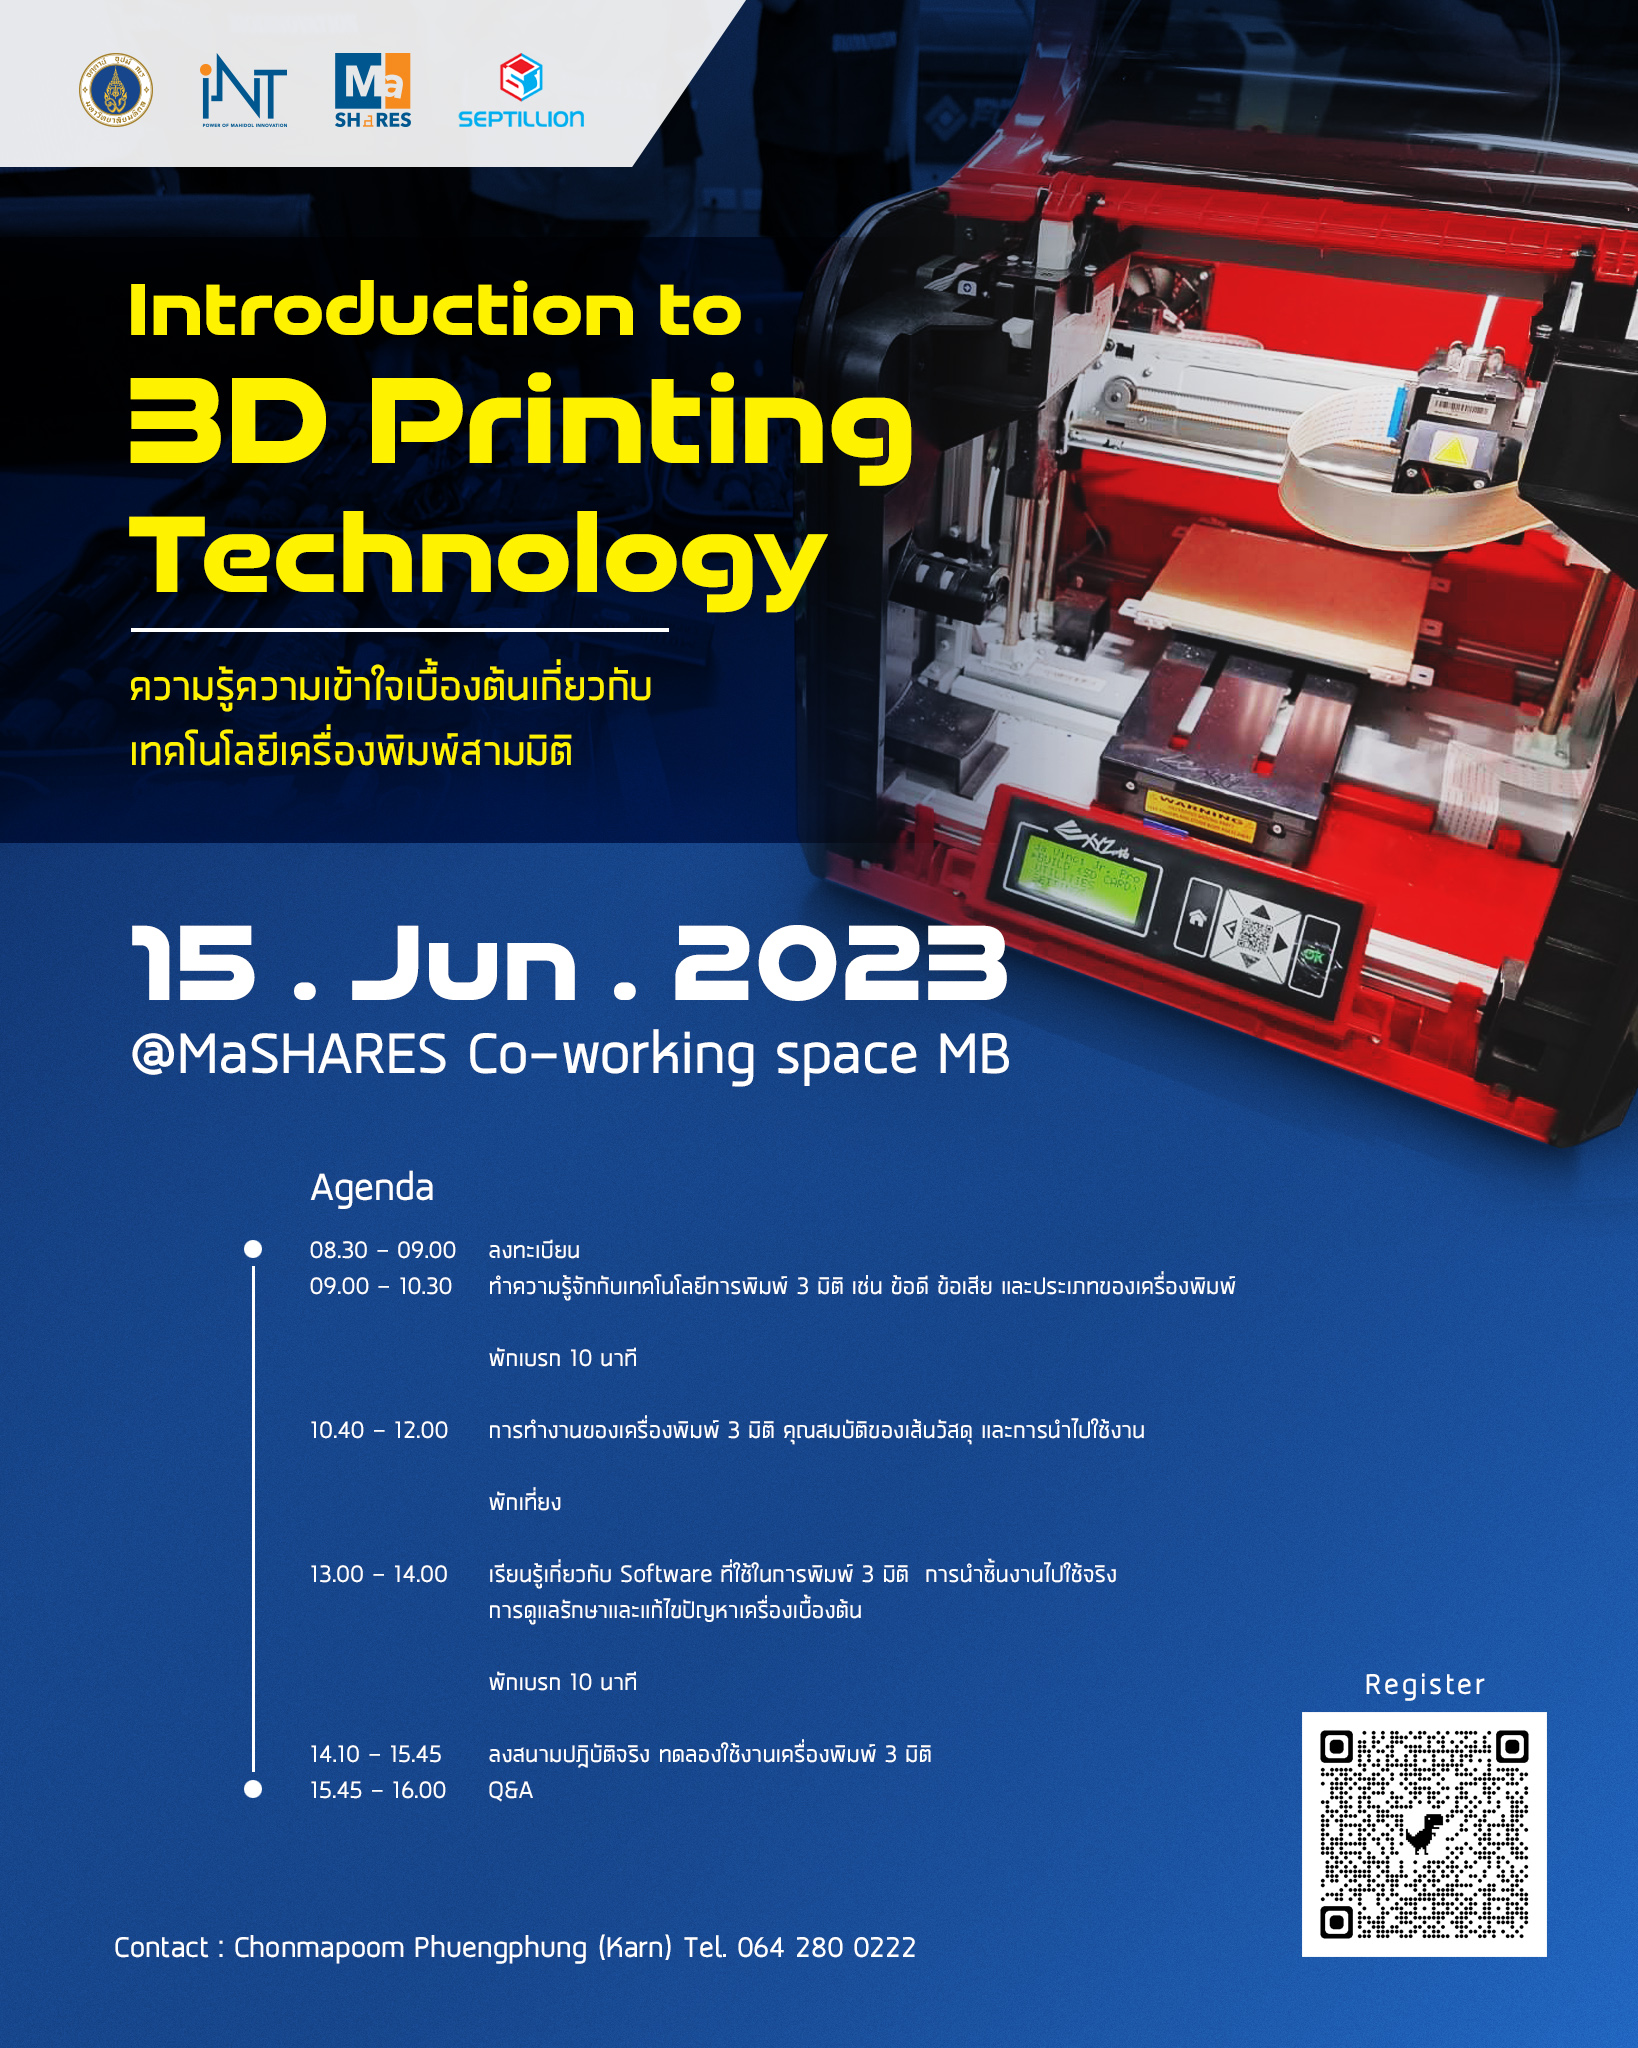 Introduction to 3D Printing Technology 5th